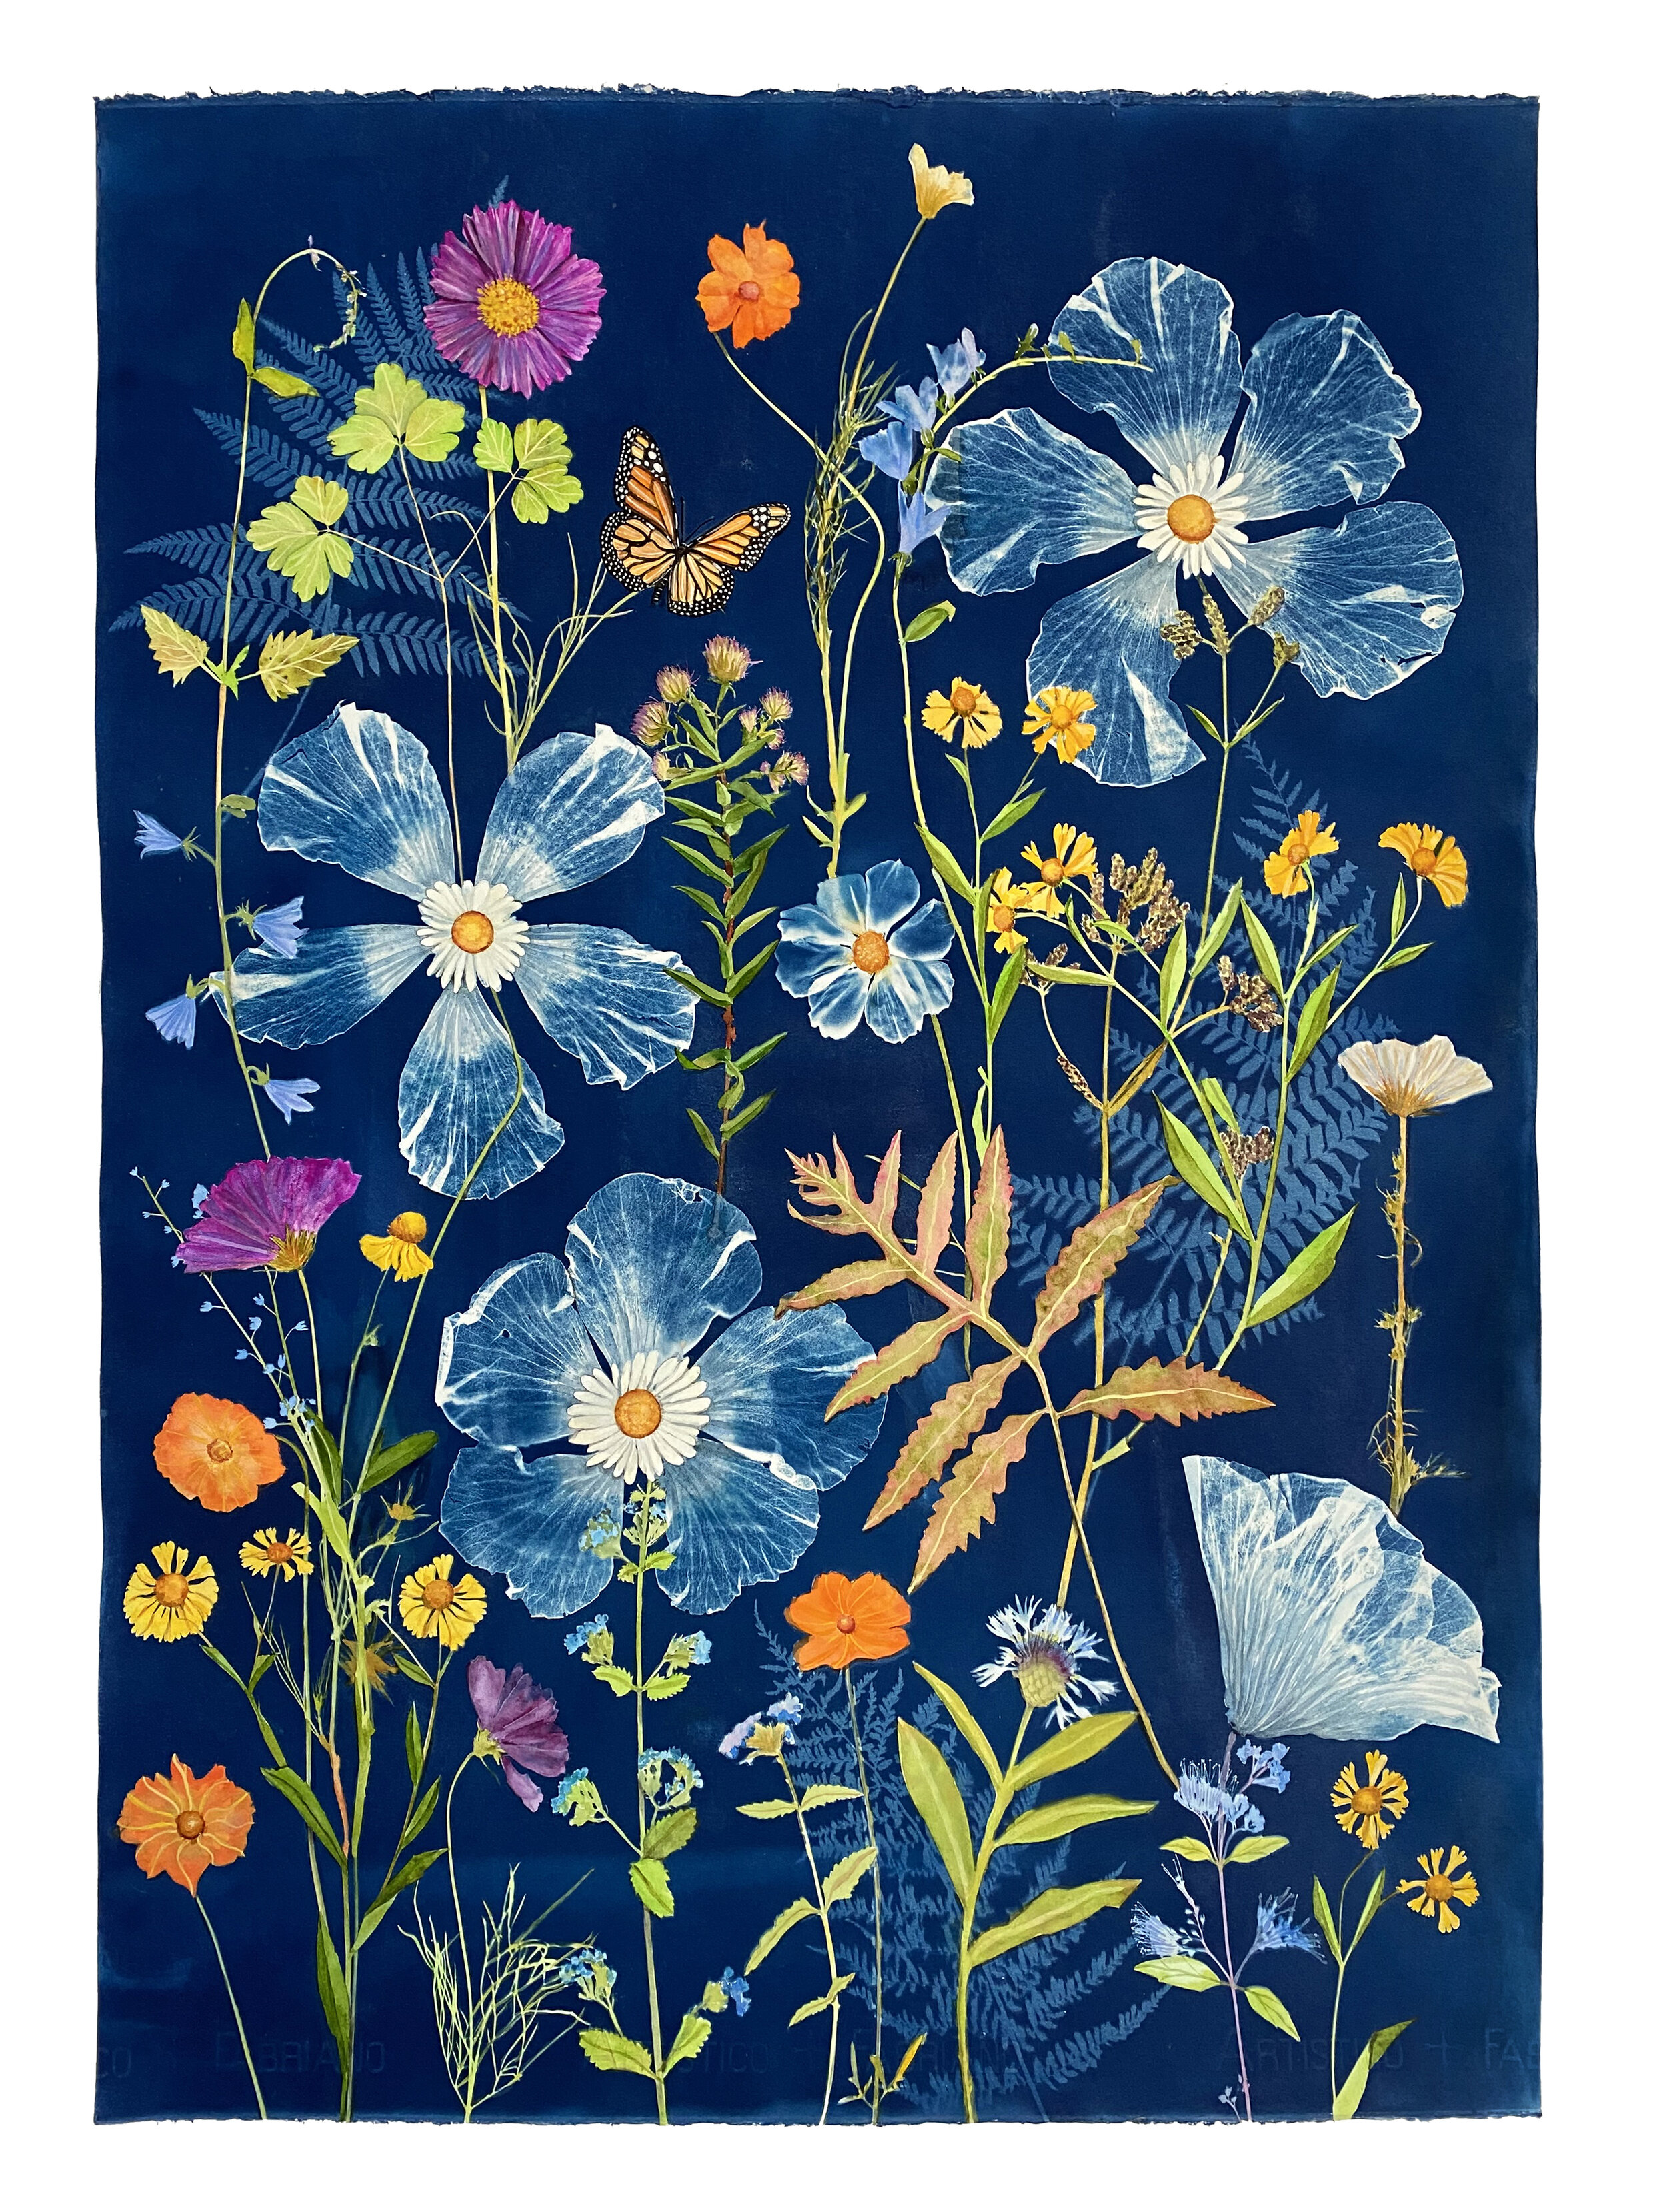 Cyanotype Painting (Hibiscus, Daisies, Cosmos, Ferns, Monarch)